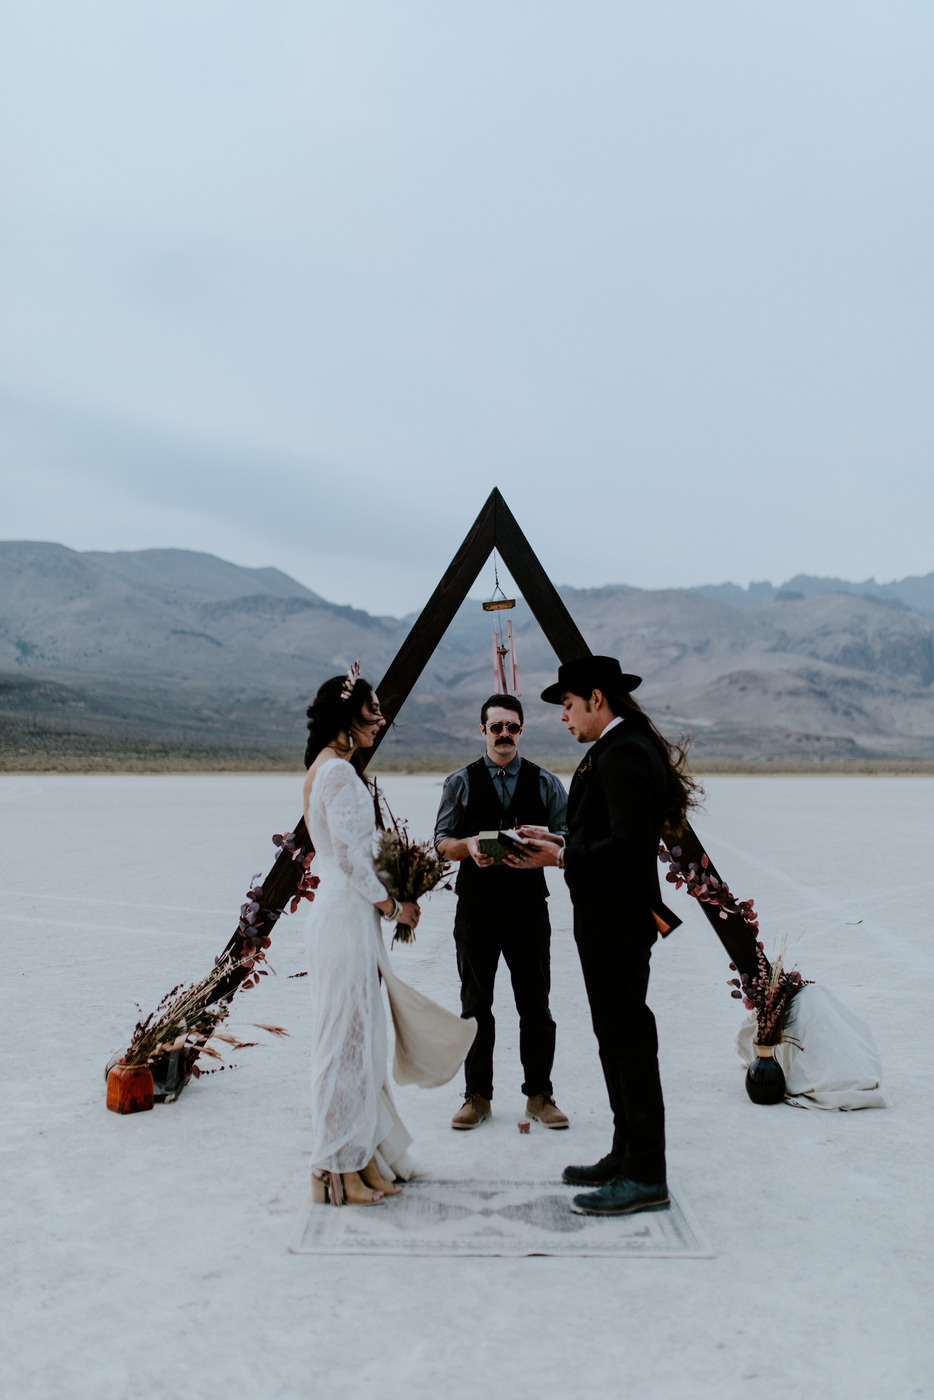 Adventure wedding and elopement photography in the Alvord Desert in Oregon.